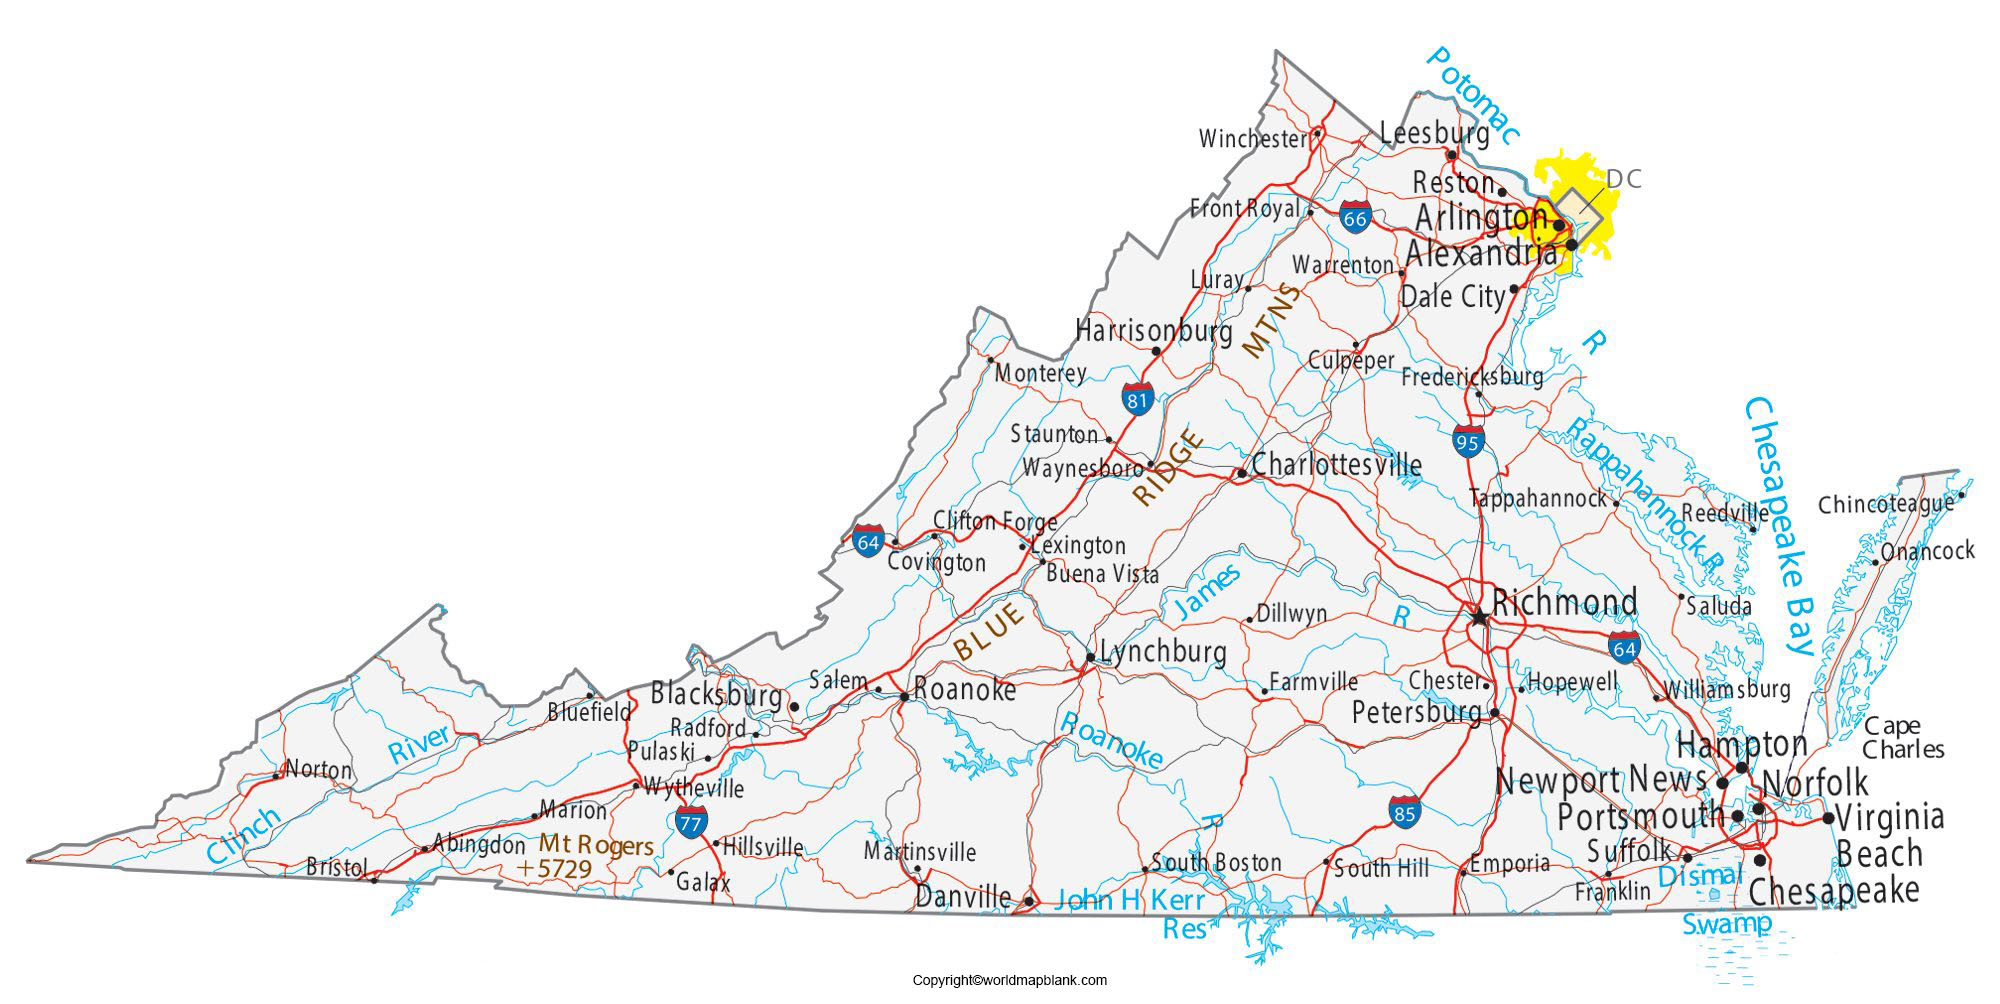 Labeled Map of Virginia with Cities